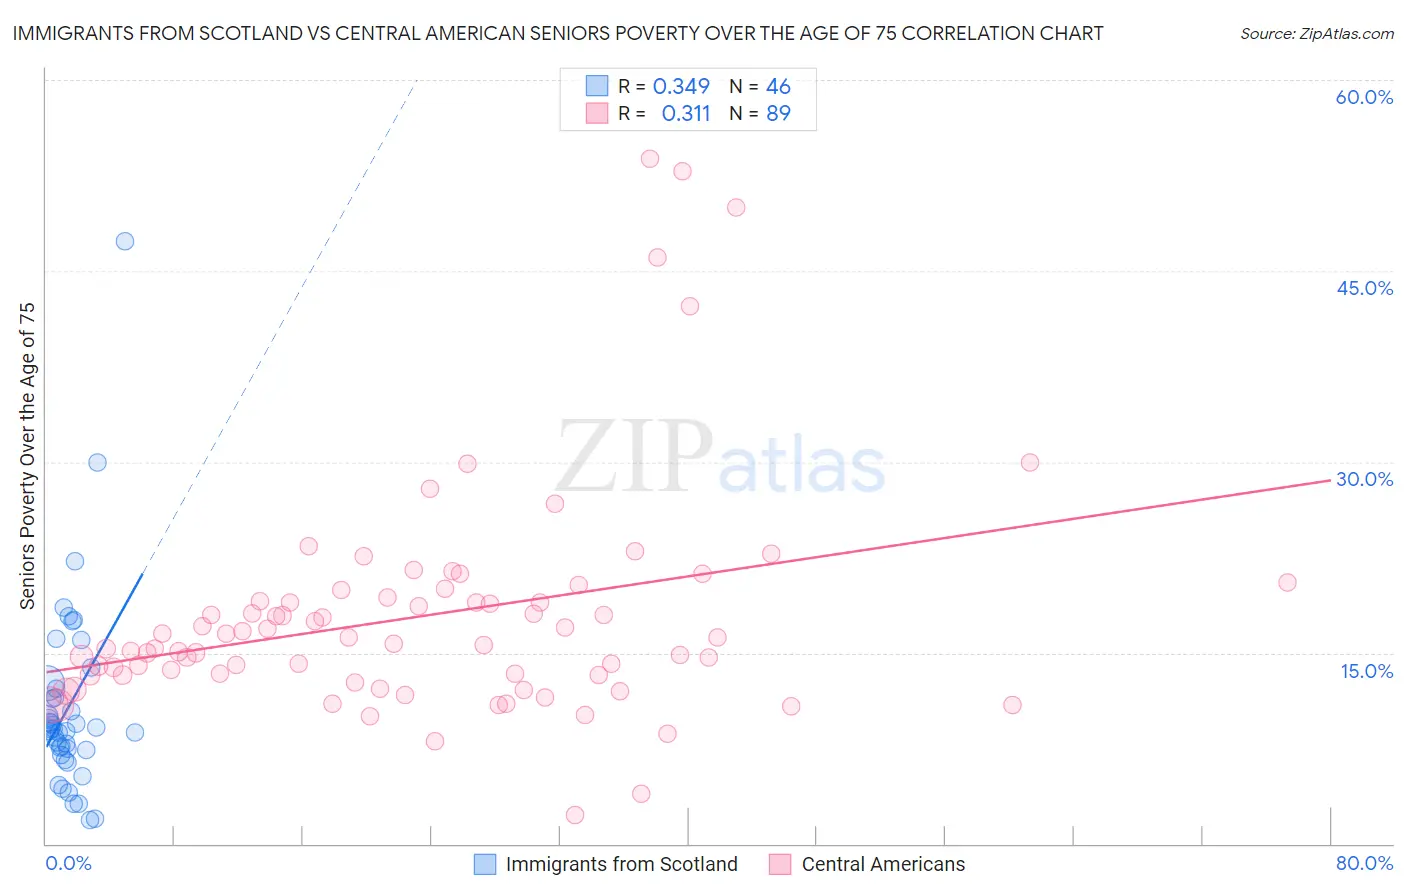 Immigrants from Scotland vs Central American Seniors Poverty Over the Age of 75